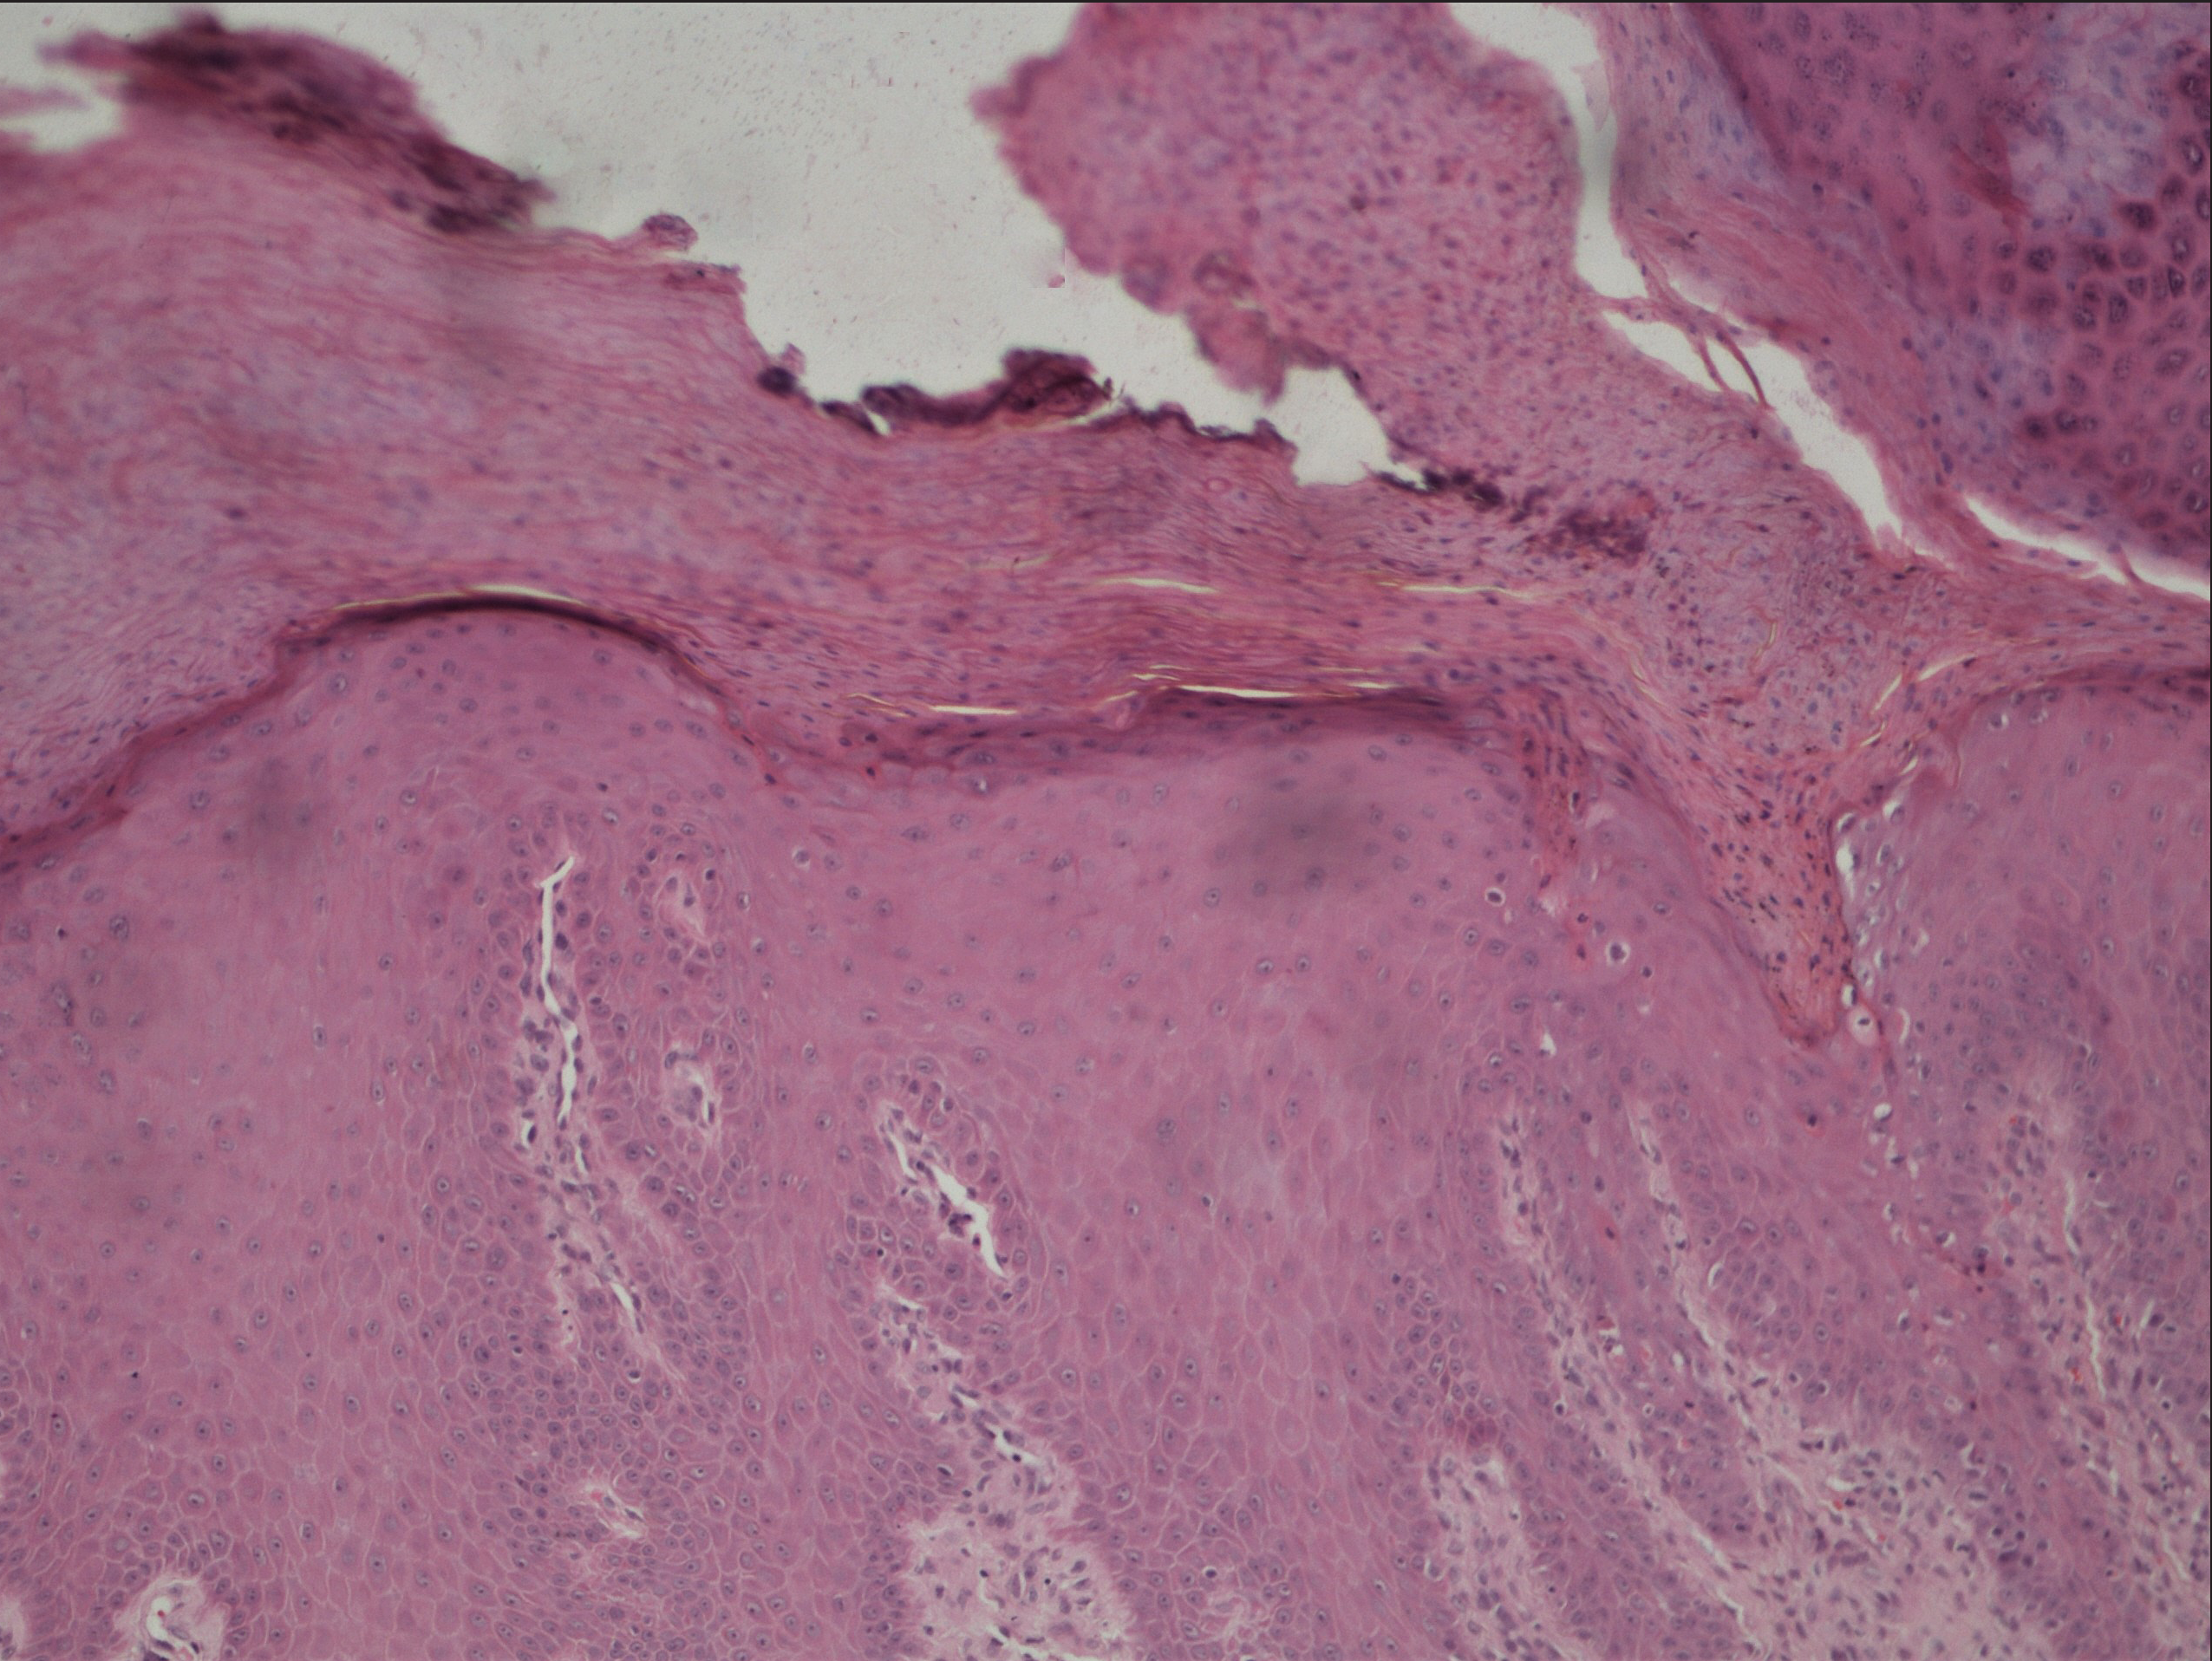 A vertically oriented parakeratotic column invaginating into the epidermis with underlying dyskeratotic cells suggestive of cornoidlamellation (H & E ×100)